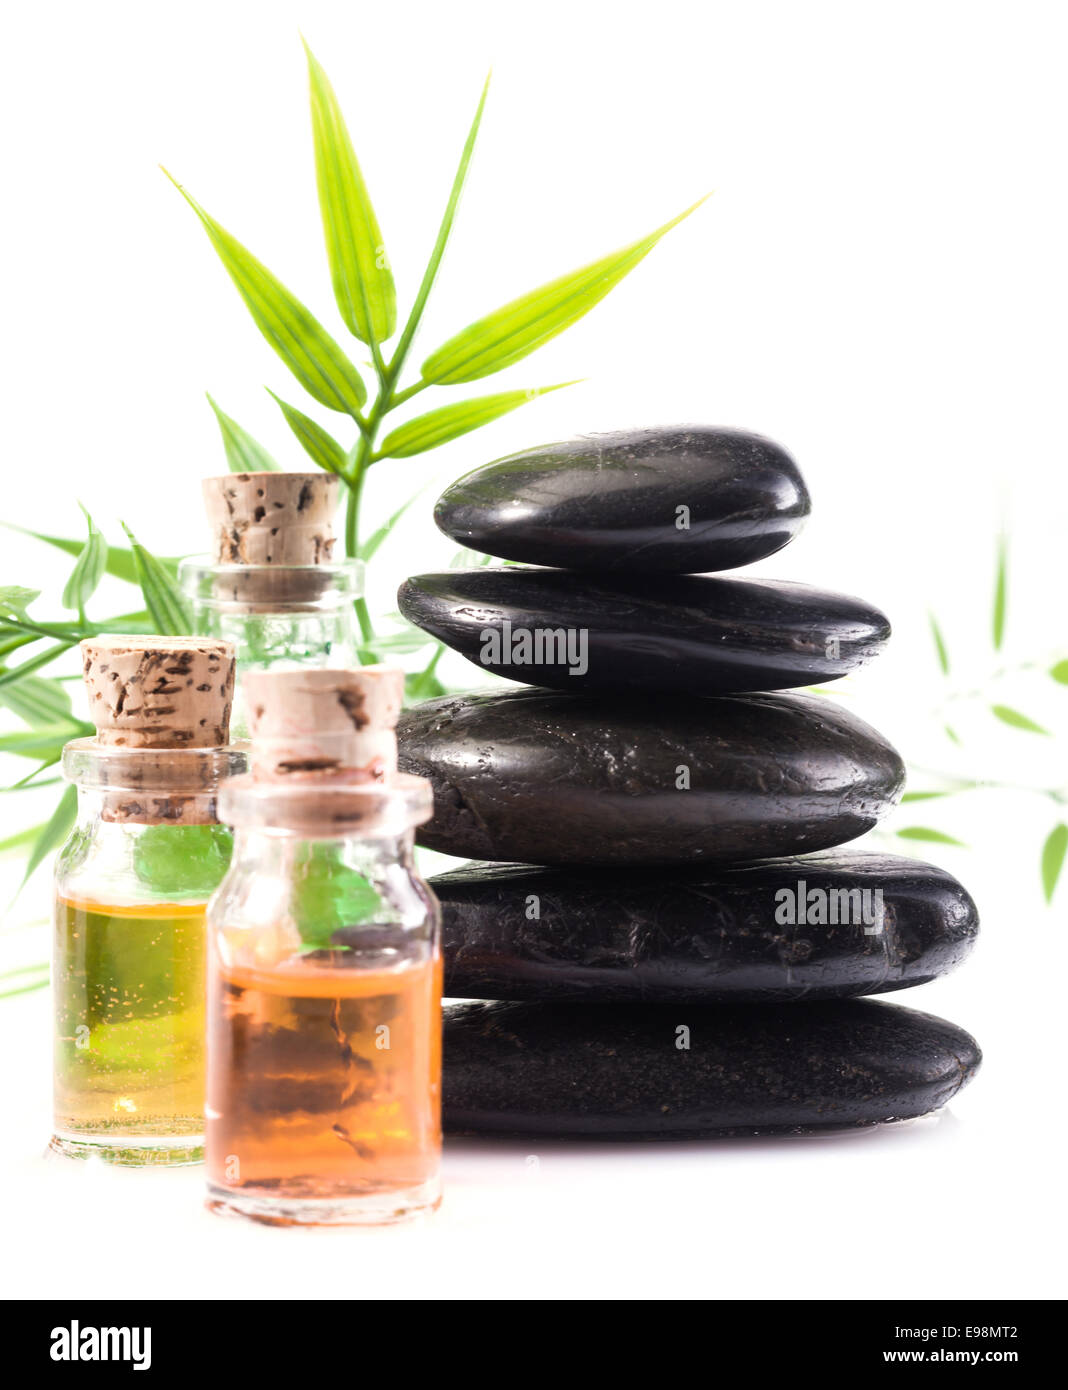 Massage oils and basalt stones necessary for a hot rock treatment in a spa setting Stock Photo